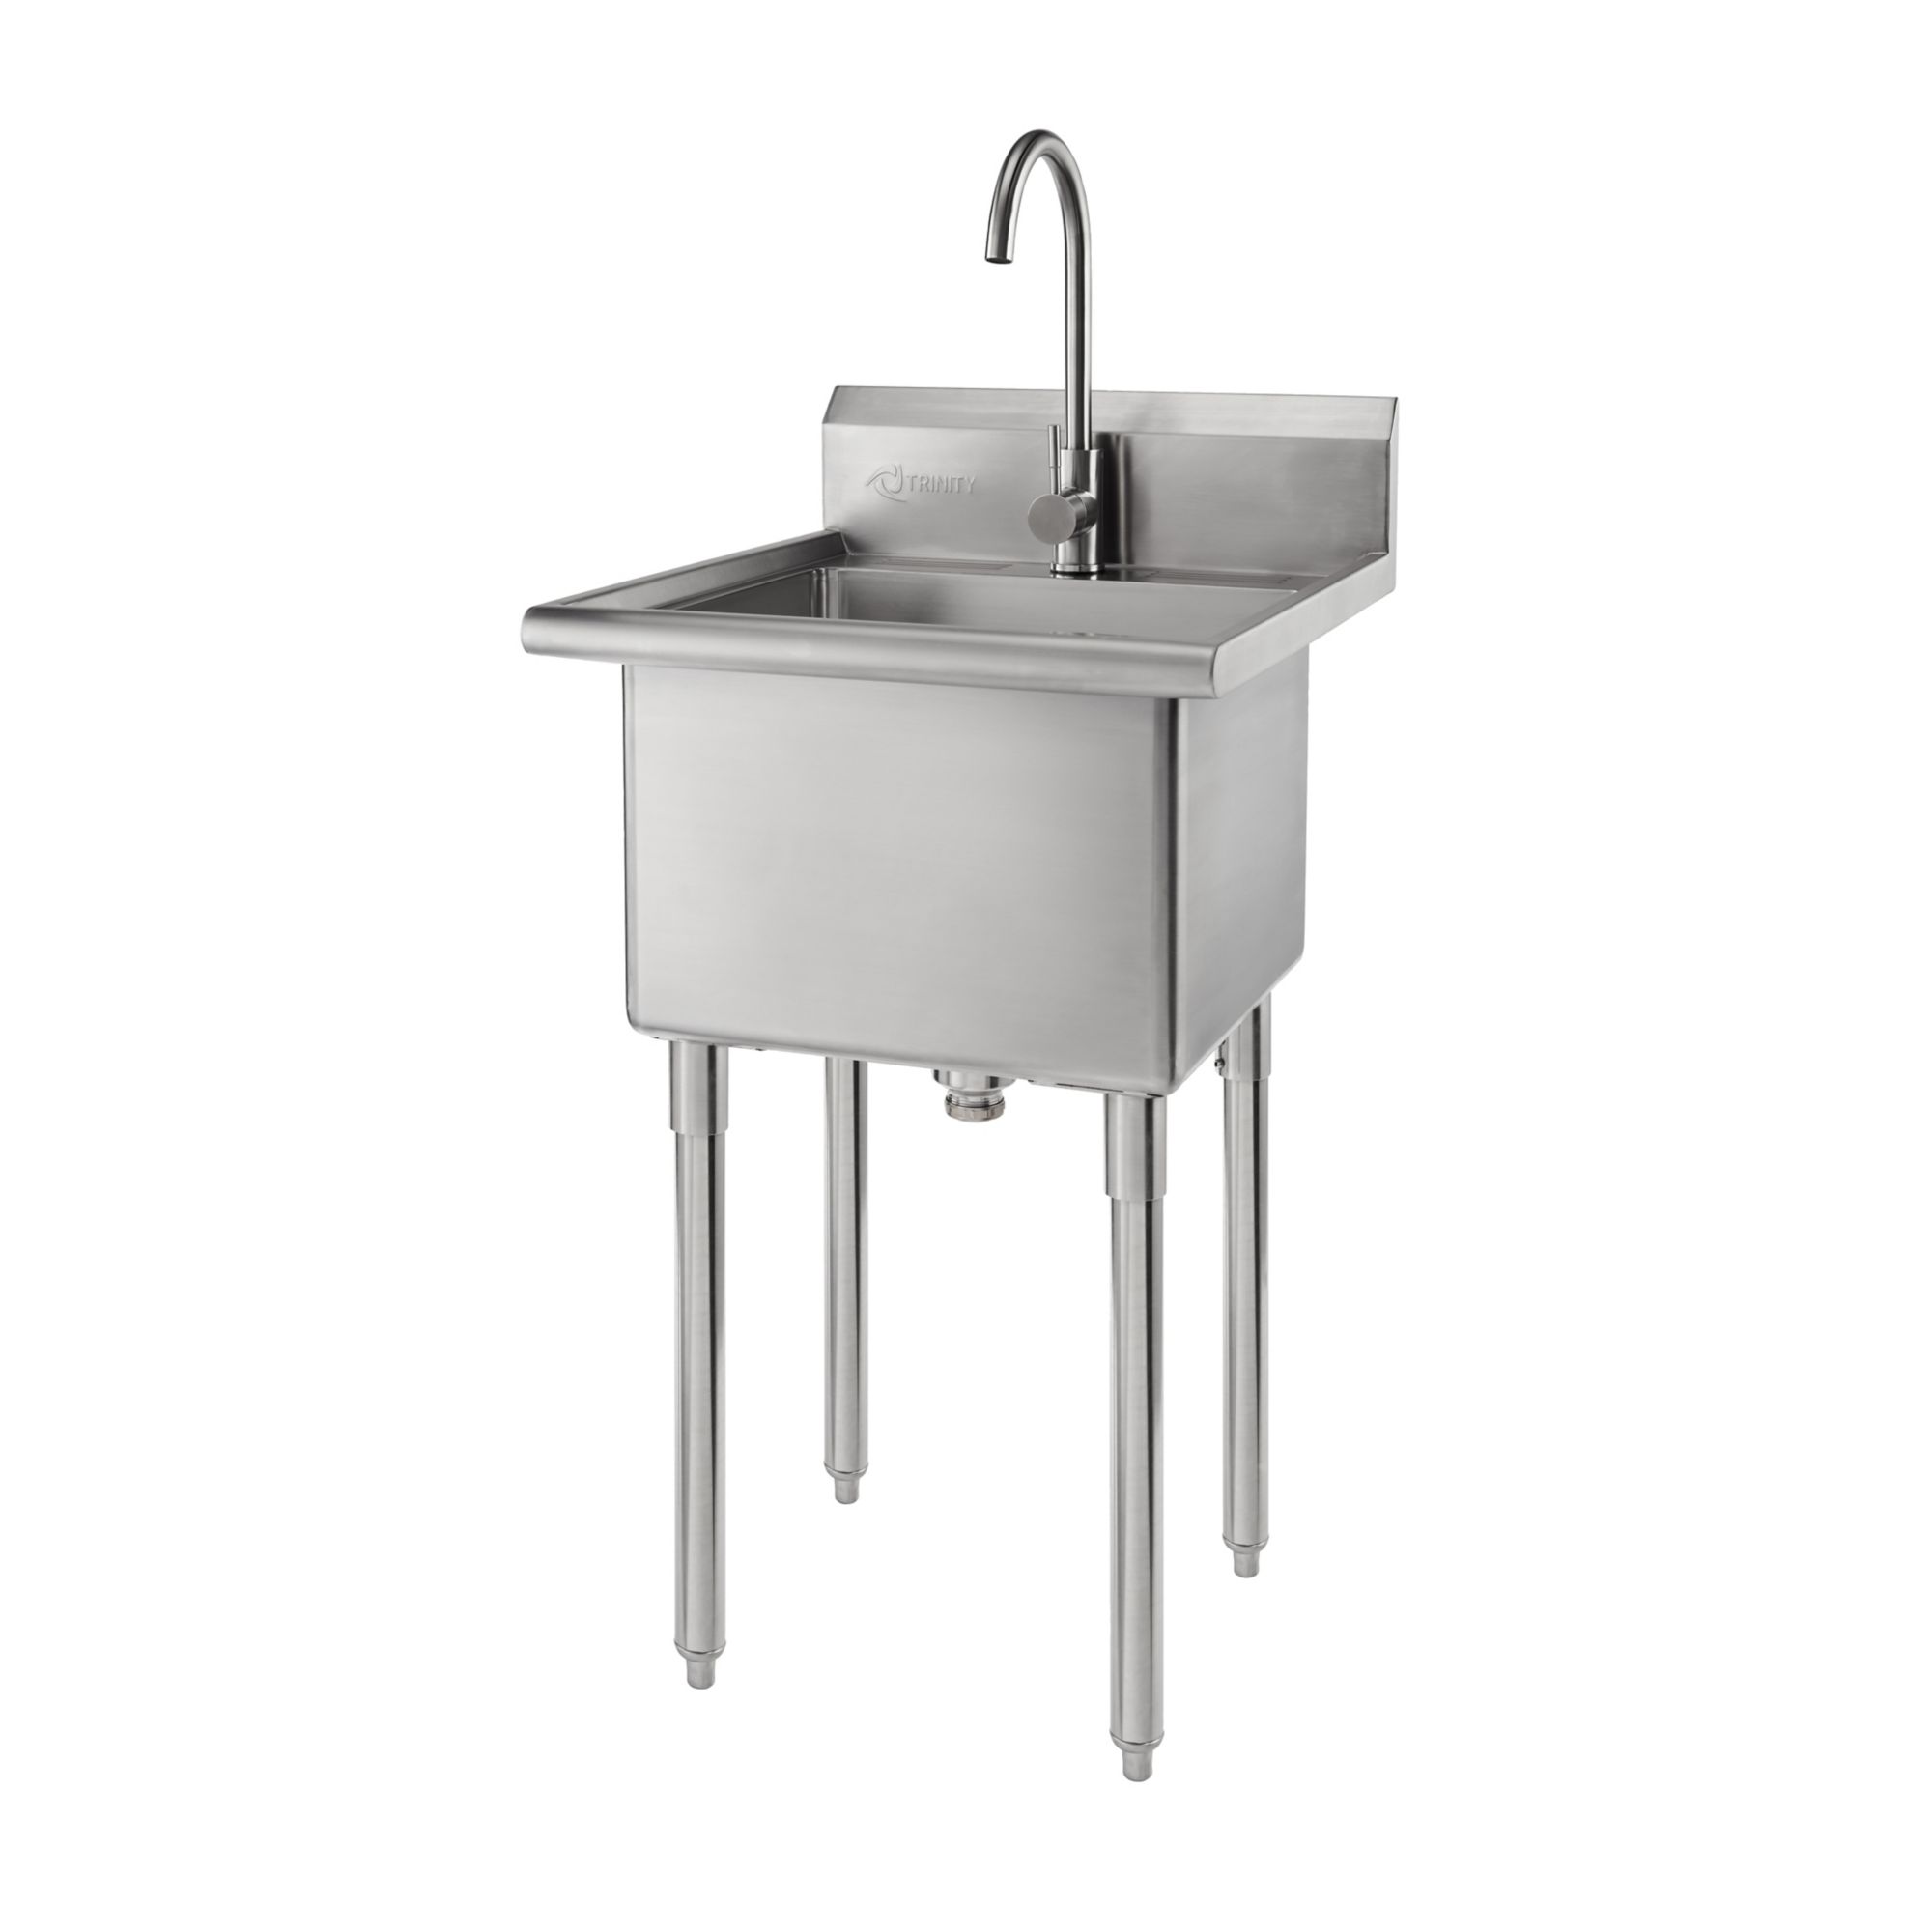 Trinity Stainless Steel Utility Sink, NSF, with Faucet - Silver